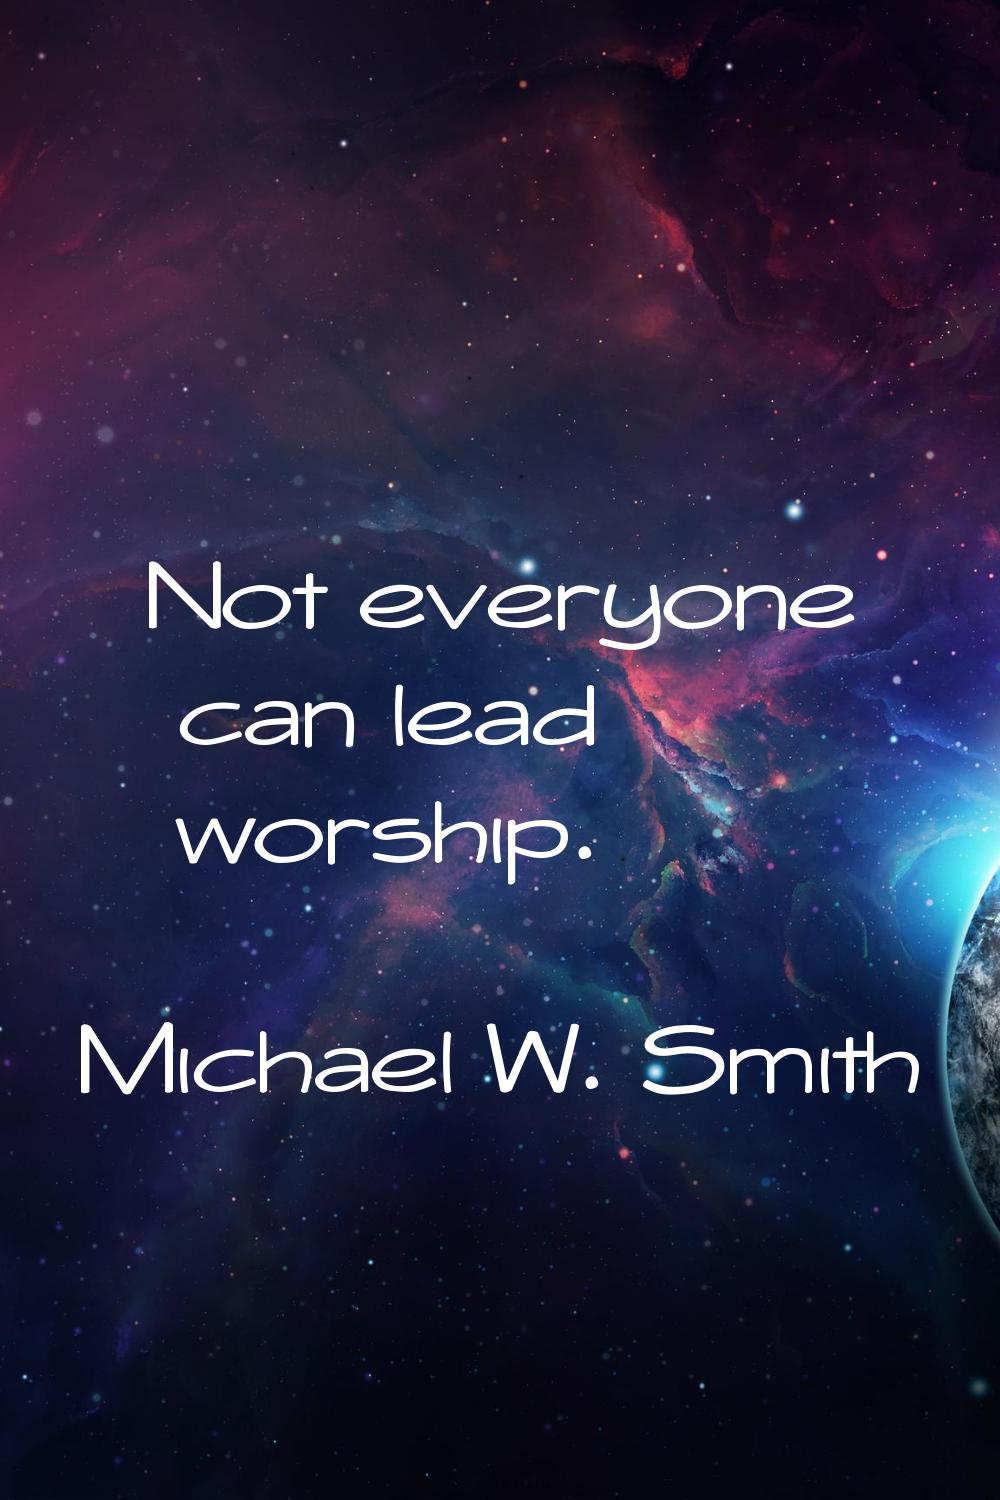 Not everyone can lead worship.